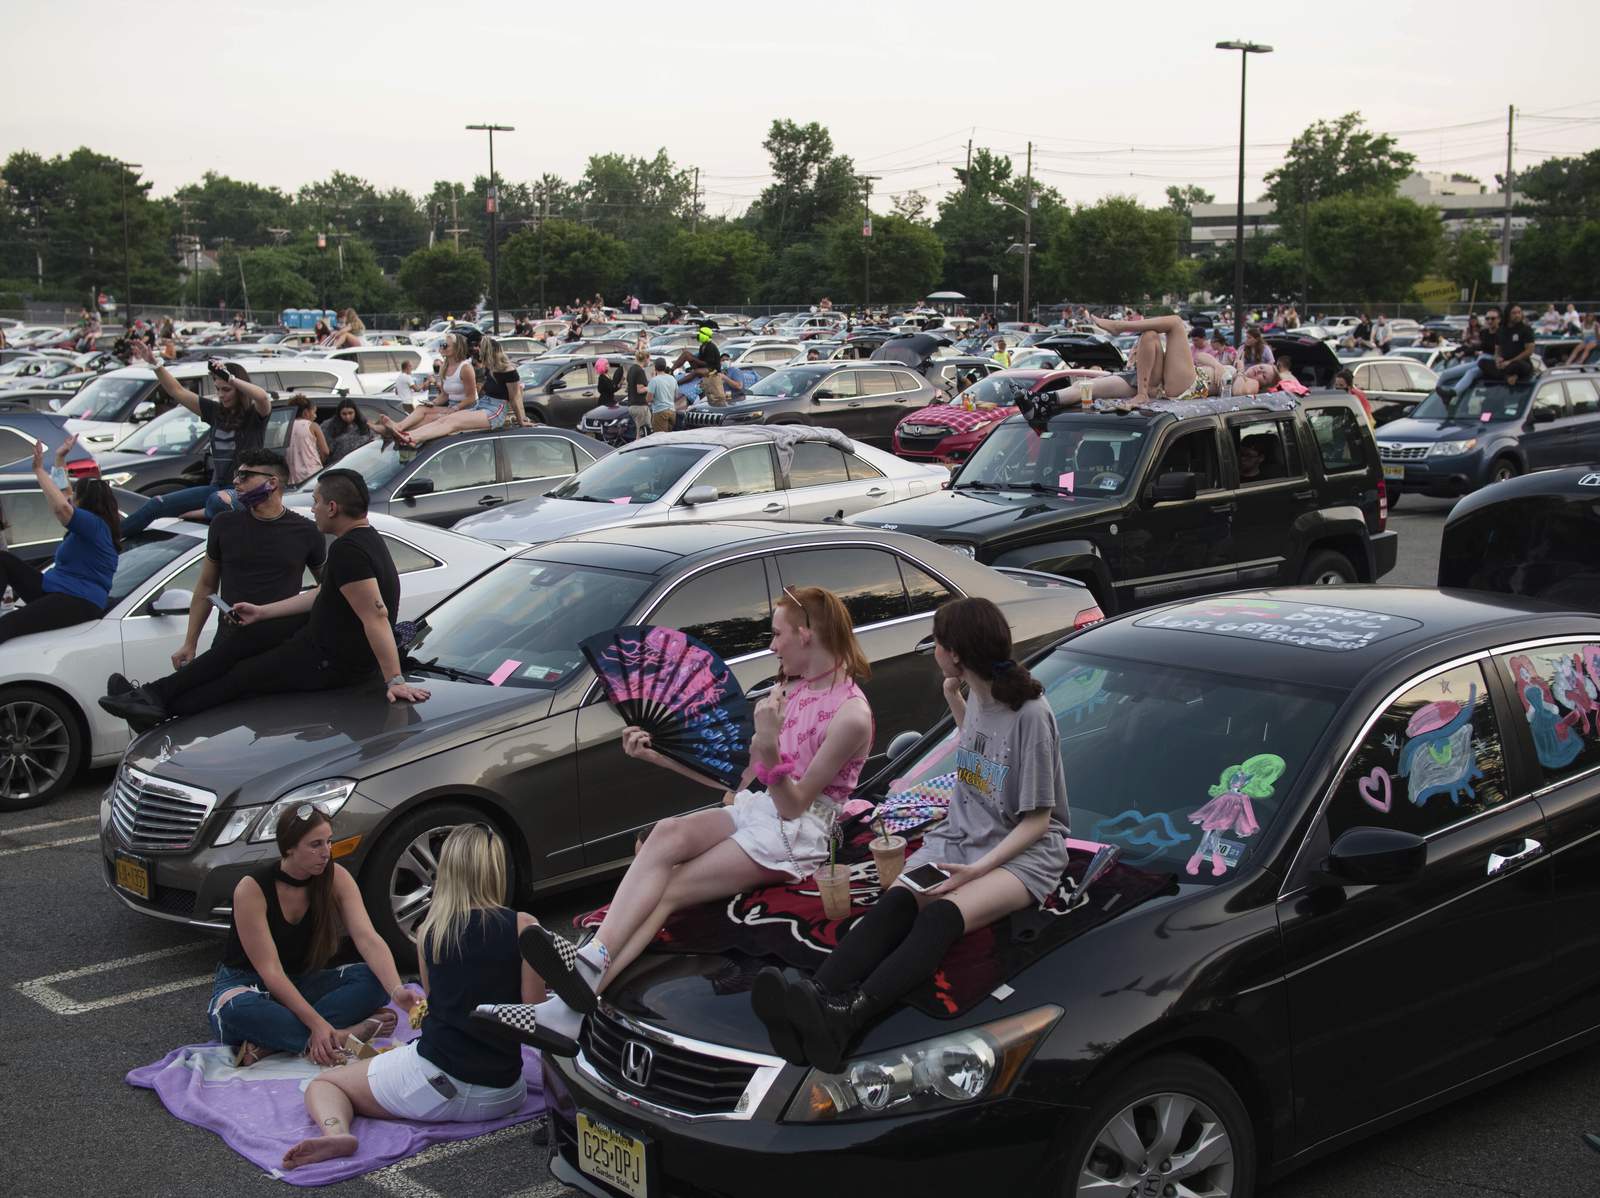 Now playing at the mall parking lot: movies, drag shows